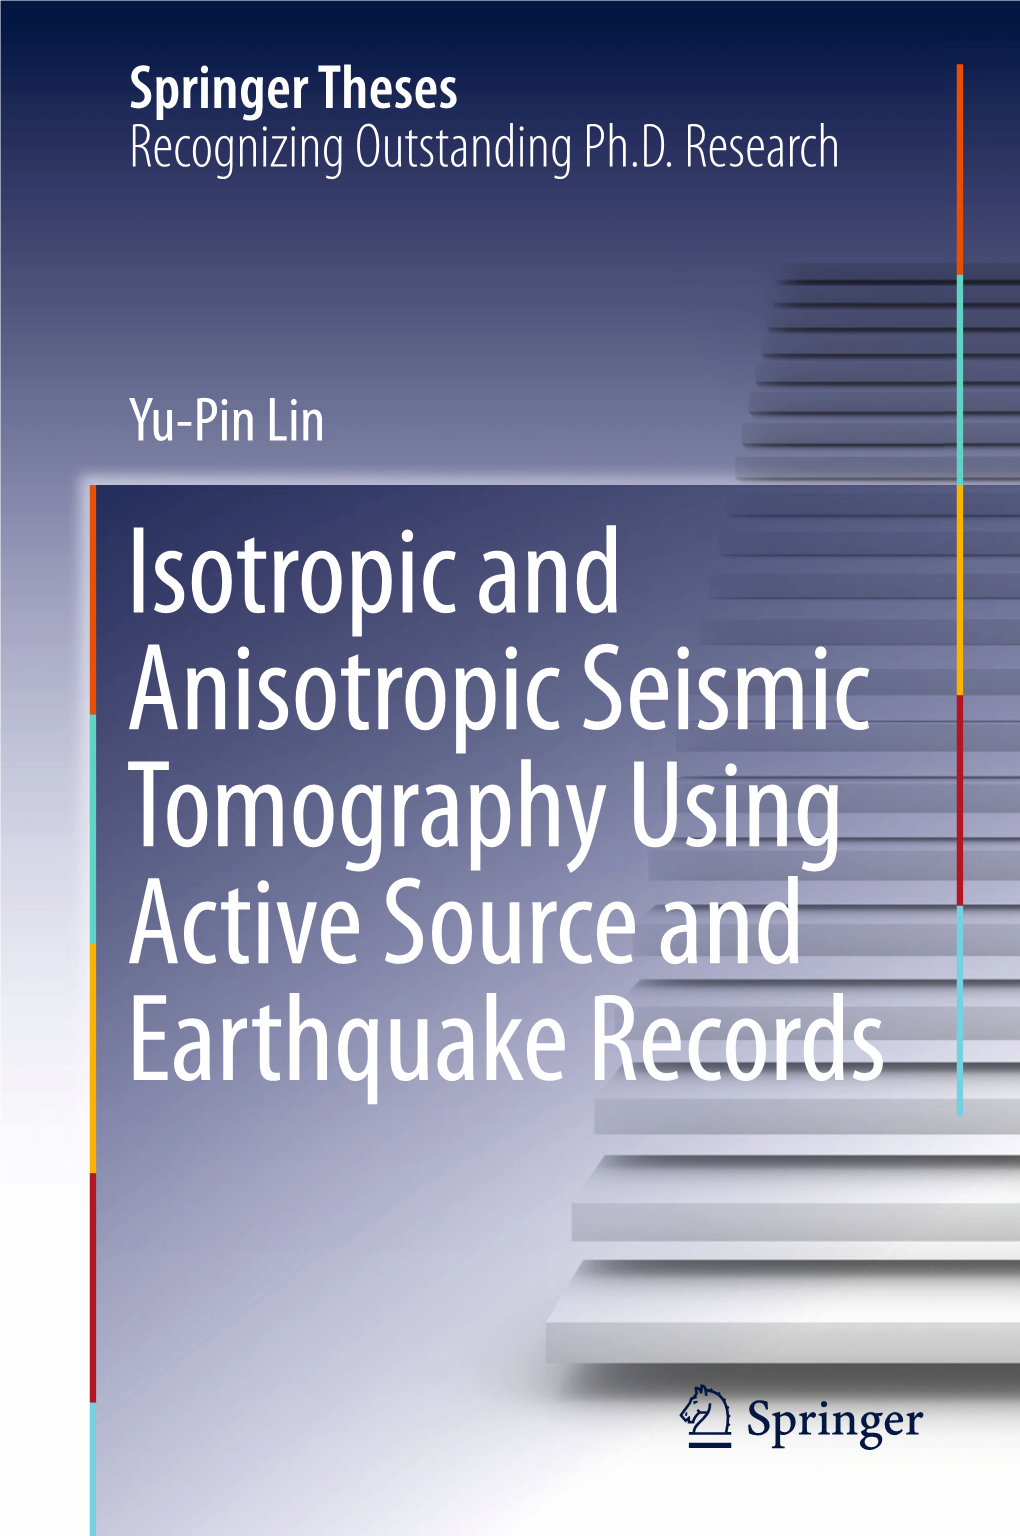 Isotropic and Anisotropic Seismic Tomography Using Active Source and Earthquake Records Springer Theses